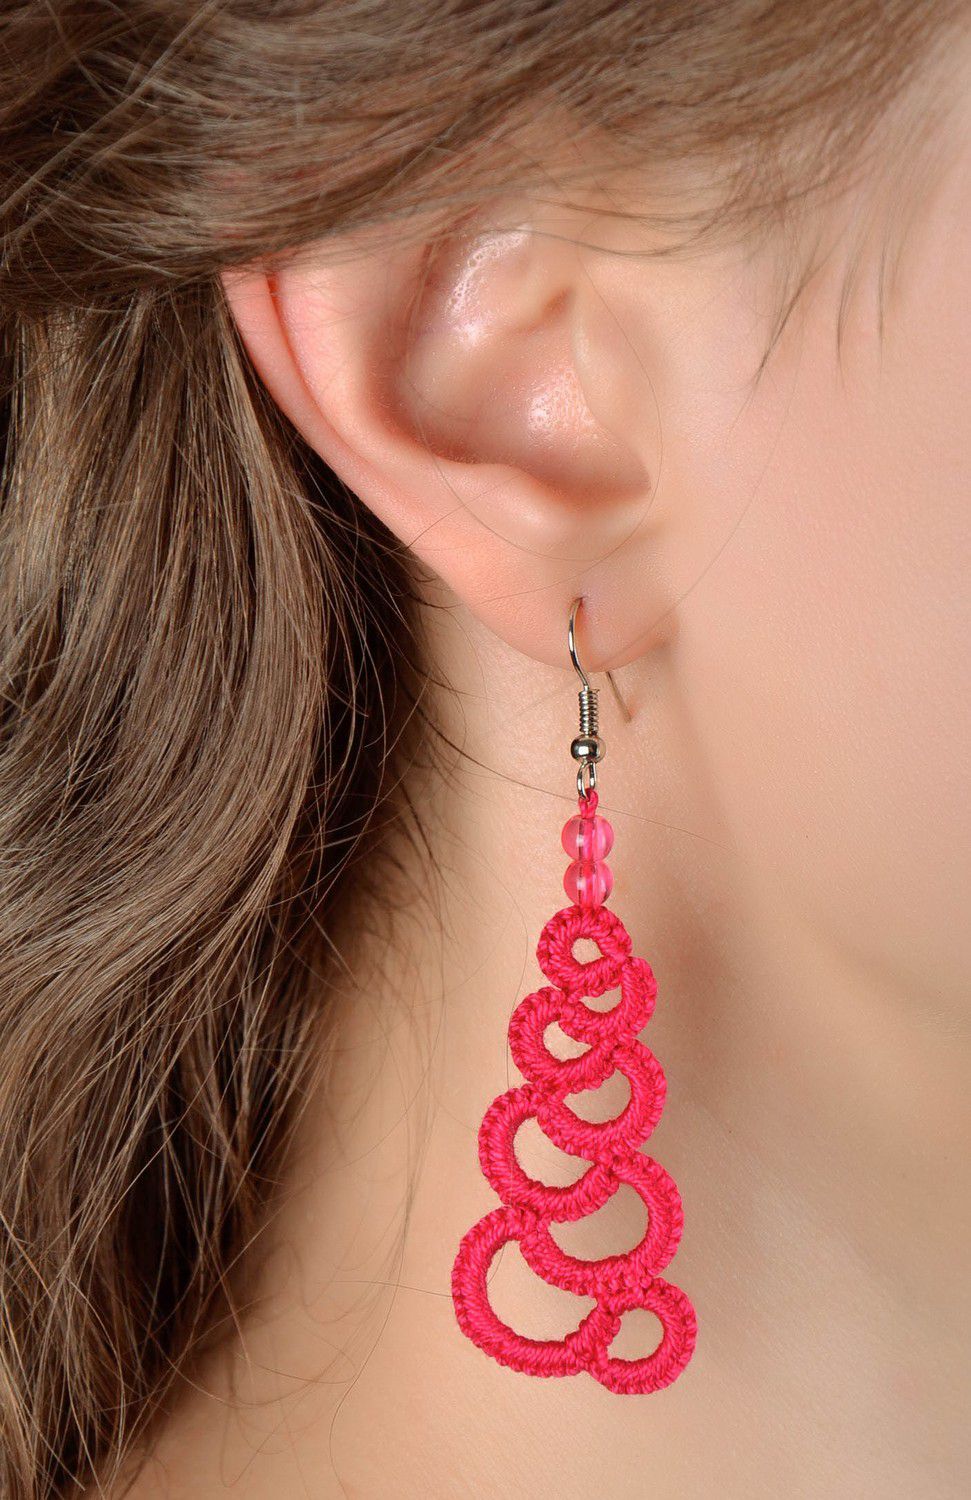 Crimson earrings made from woven lace photo 4